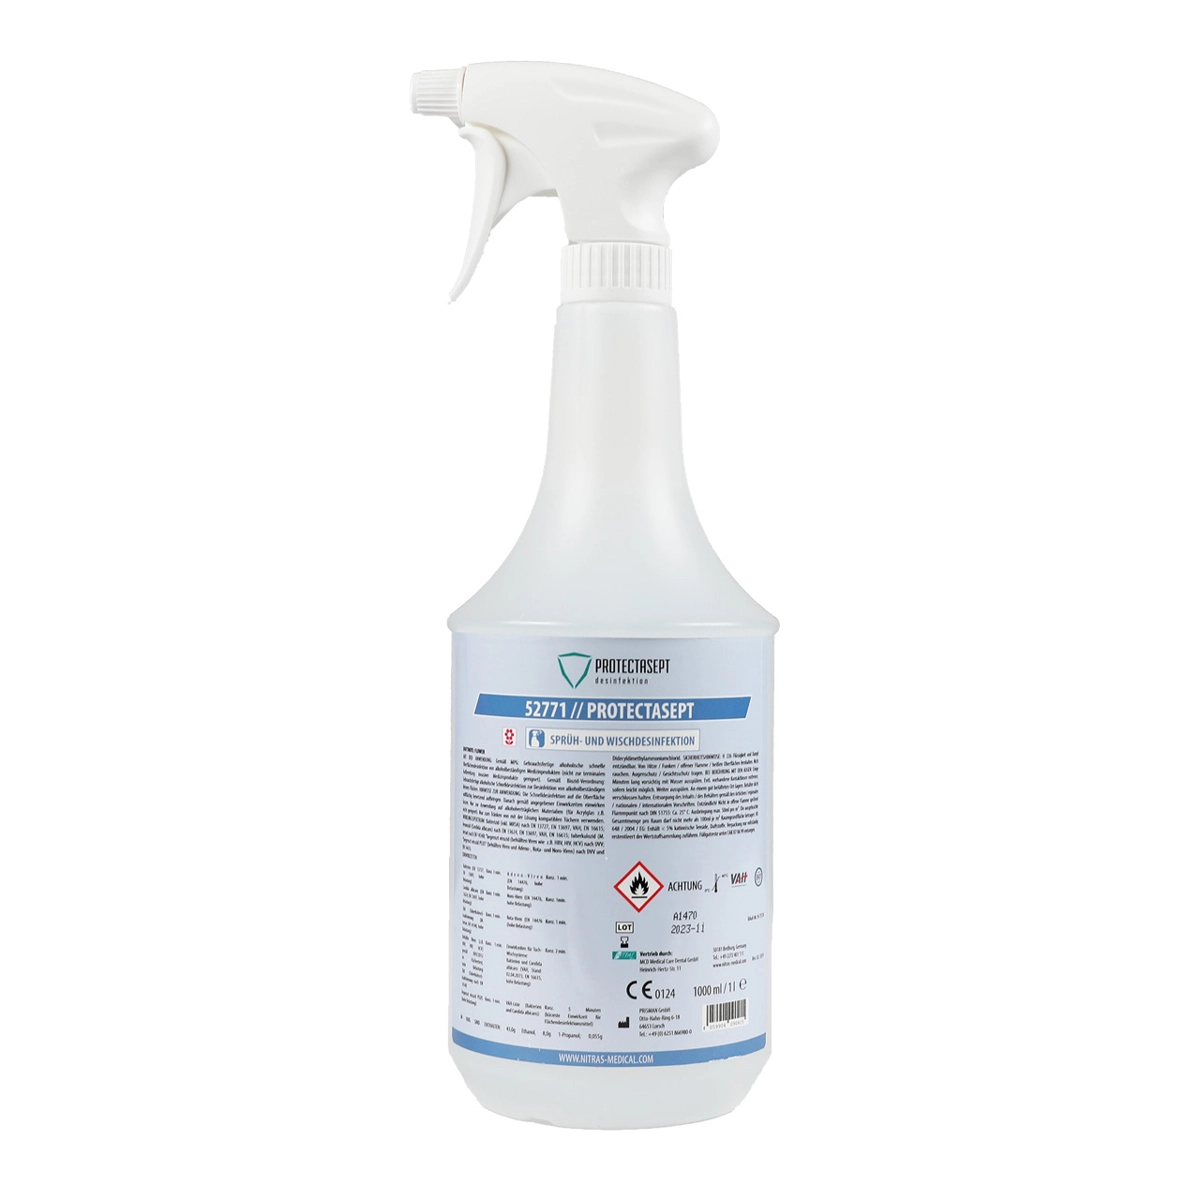 Nitras Spray and Wipe Disinfection Flower 1L